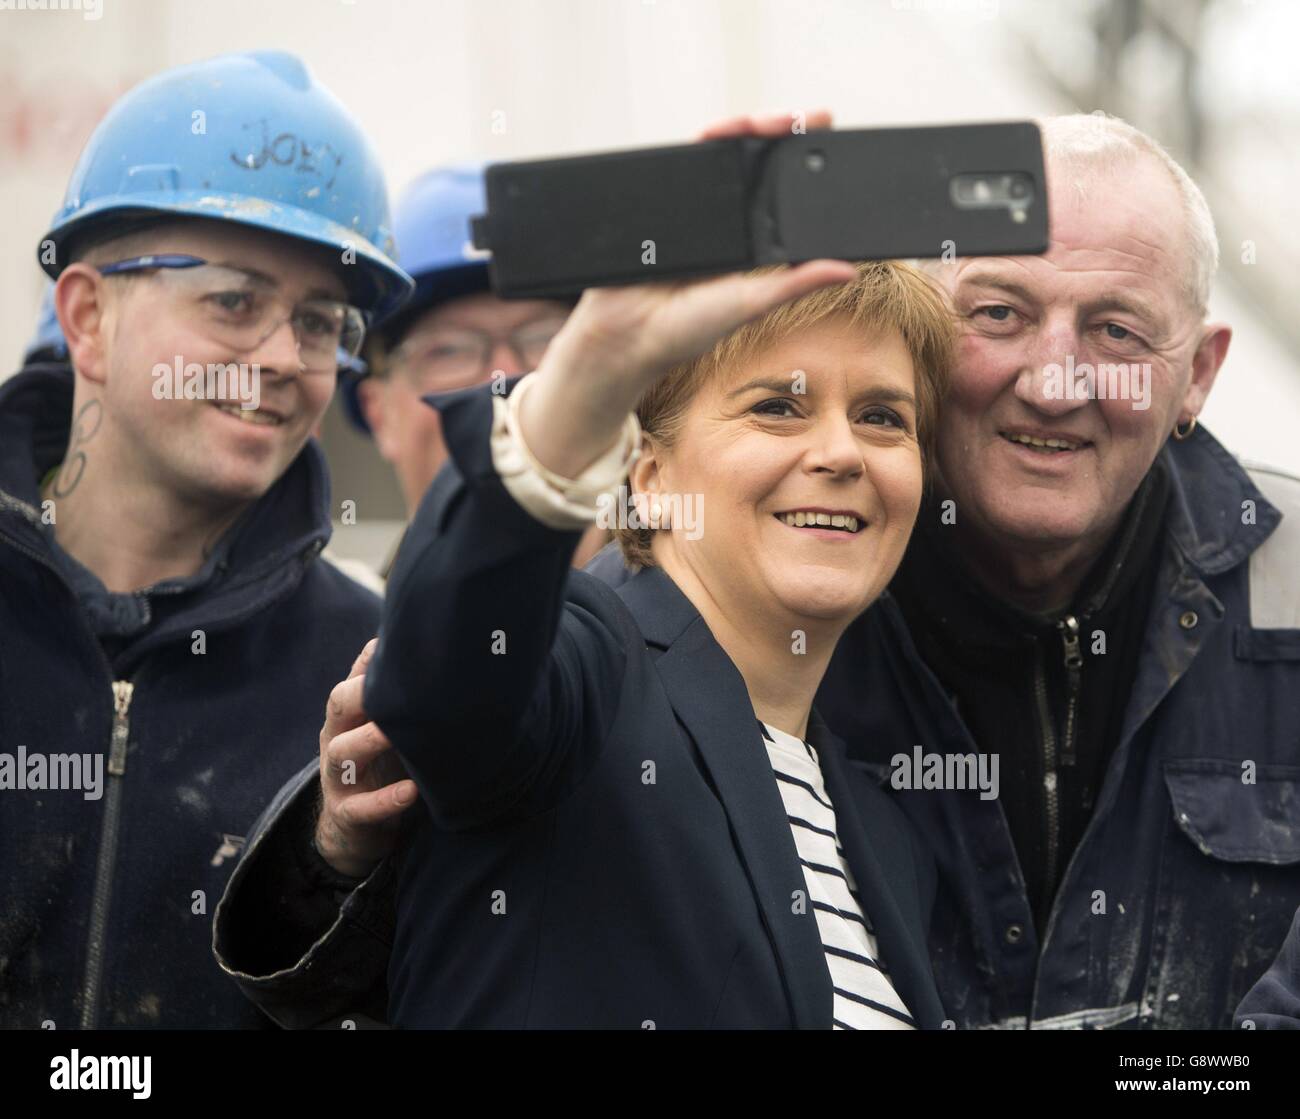 Scottish National Party leader Nicola Sturgeon takes a selfie with workers during her visit to Ferguson shipyard in Port Glasgow while on the Scottish election campaign trail. Stock Photo